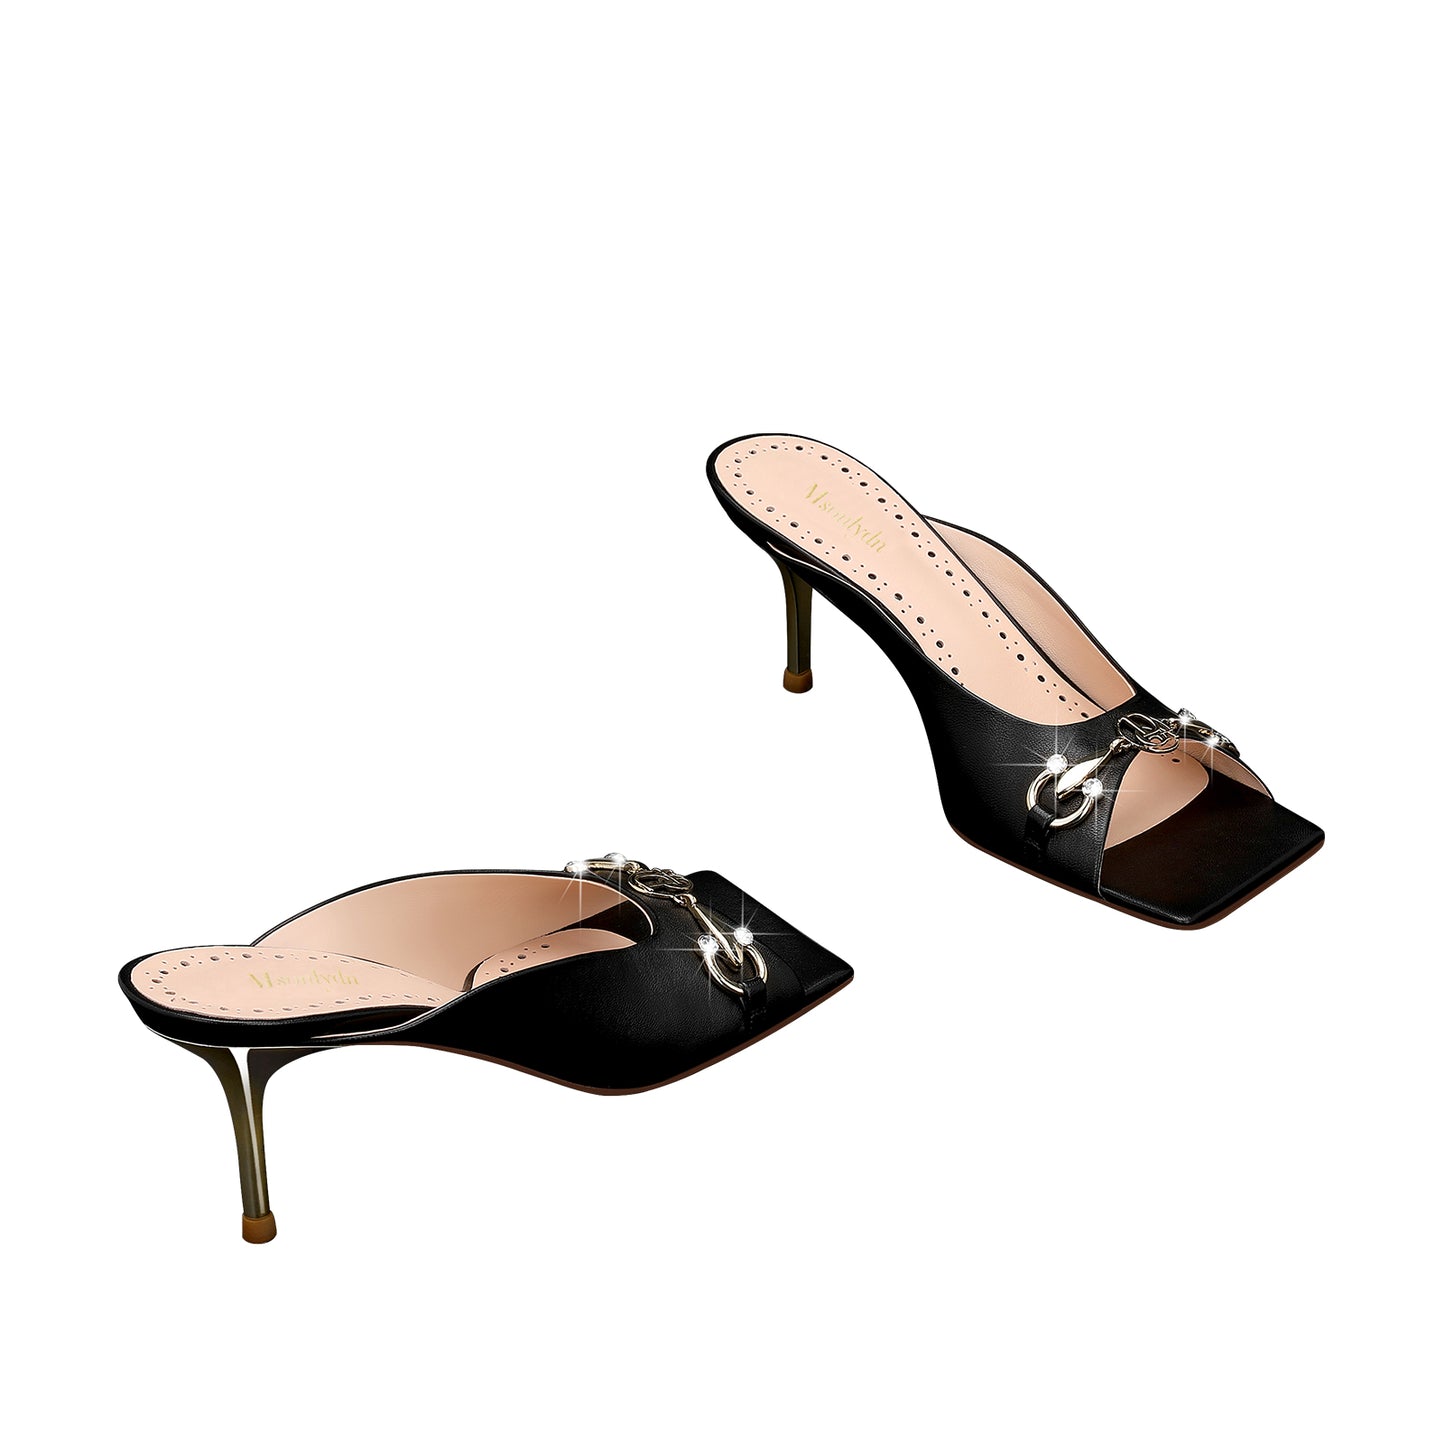 Sleek No Strap Sandals for Women Heels with Square Toe Mules and Peep Toe Leather Elegance